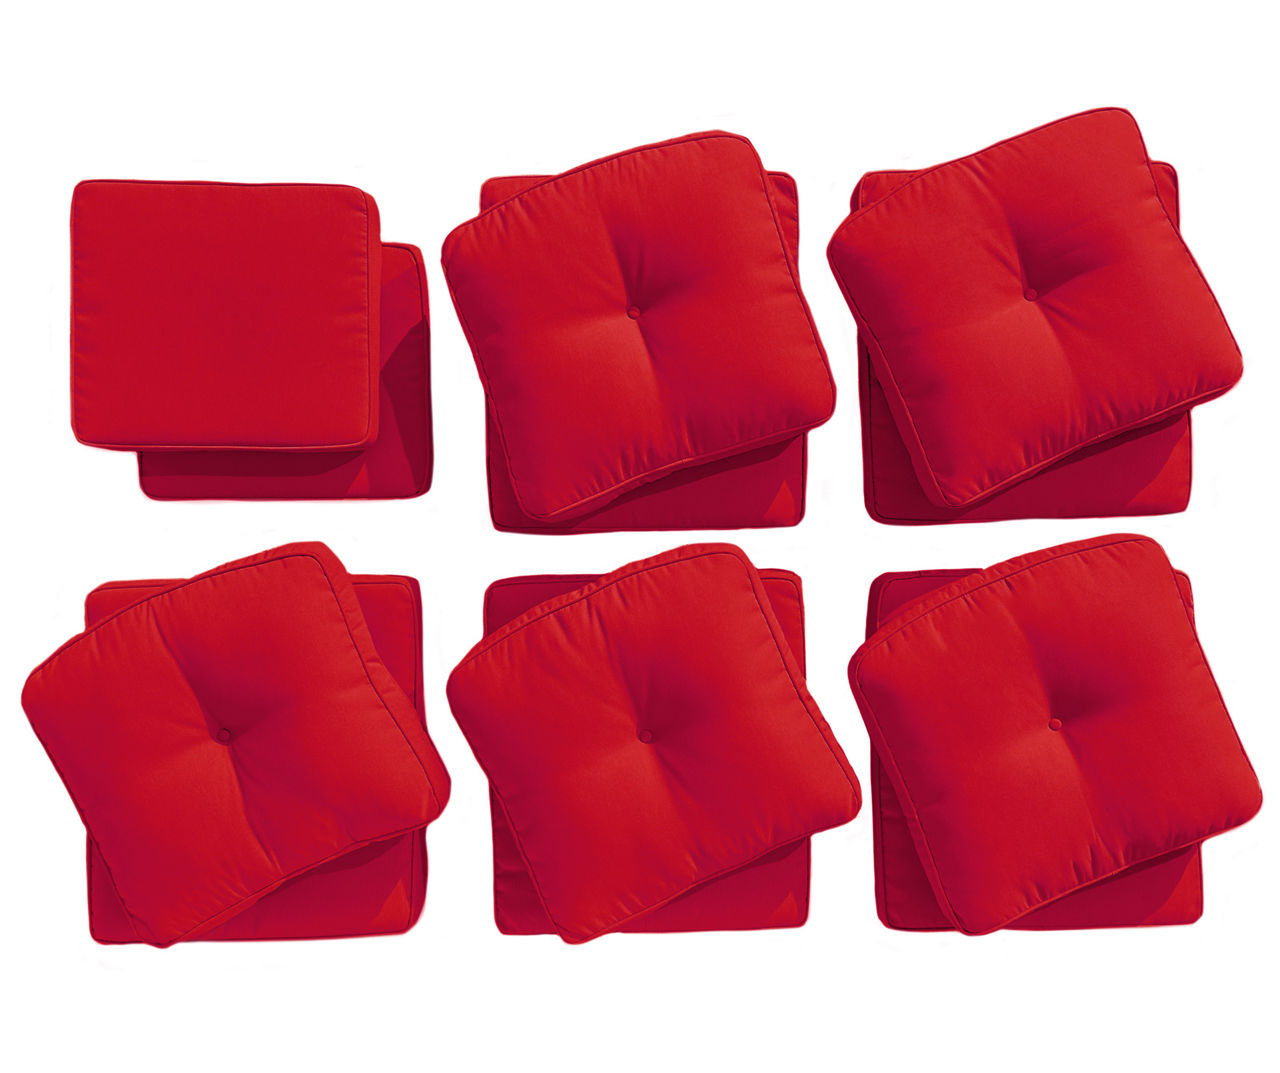 Sofa Replacement Cushions Red Back Cushion